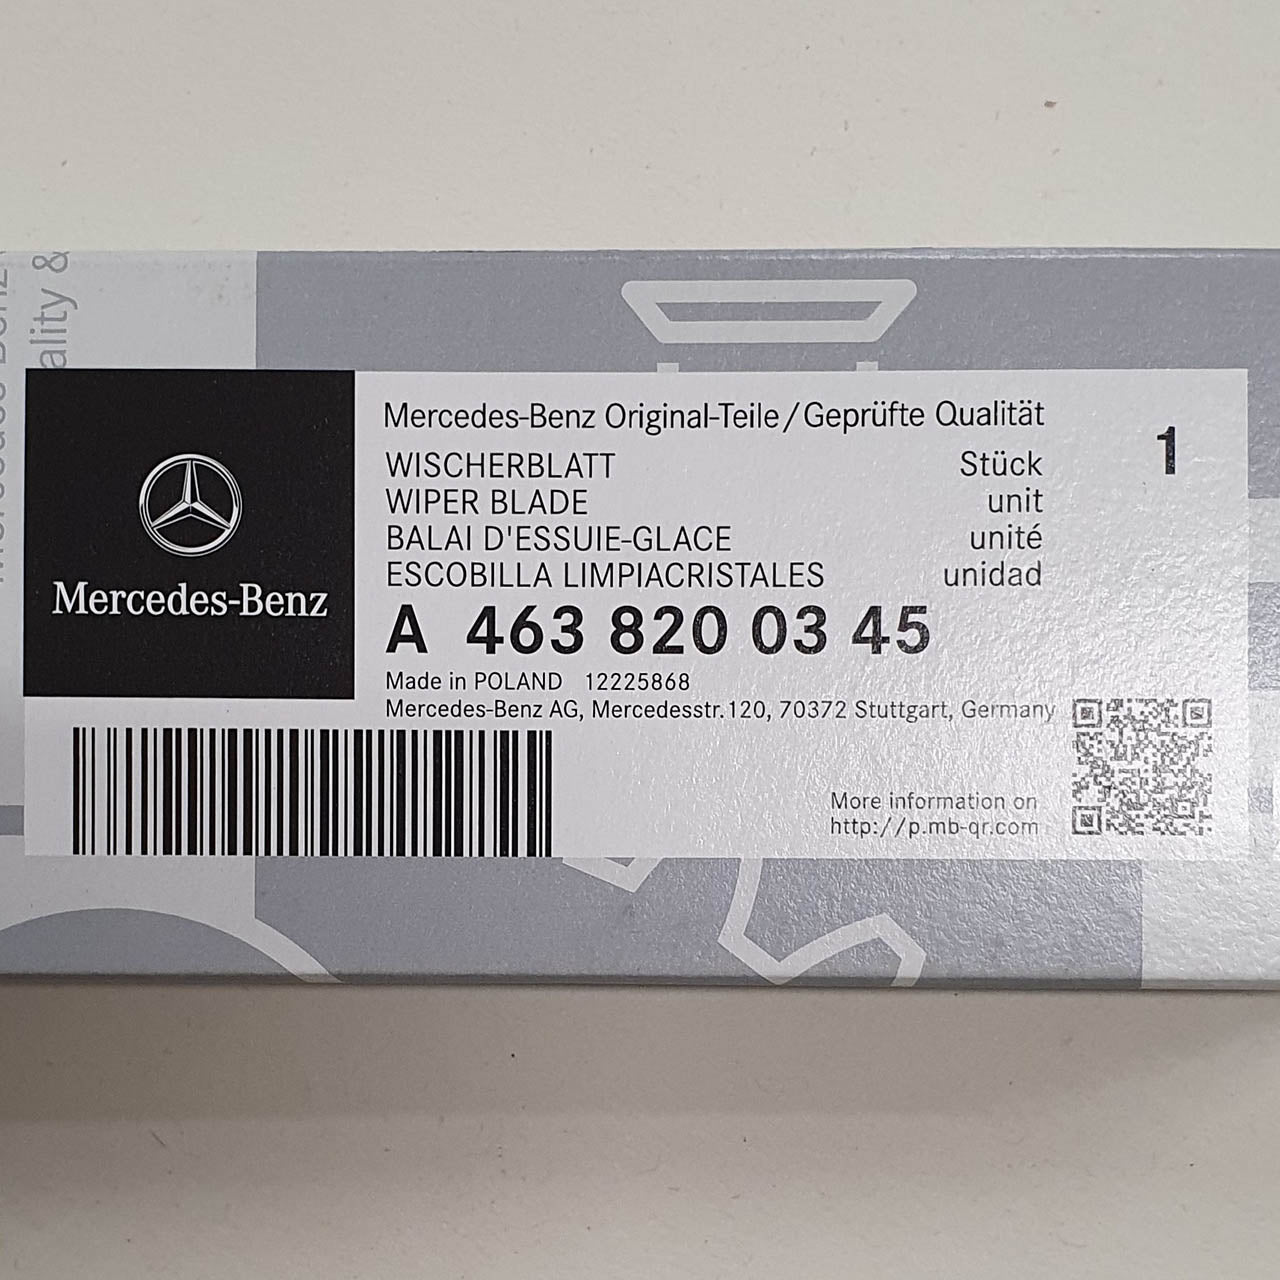 Genuine Mercedes-Benz G Class rear wiper blade for 461 and 463 models